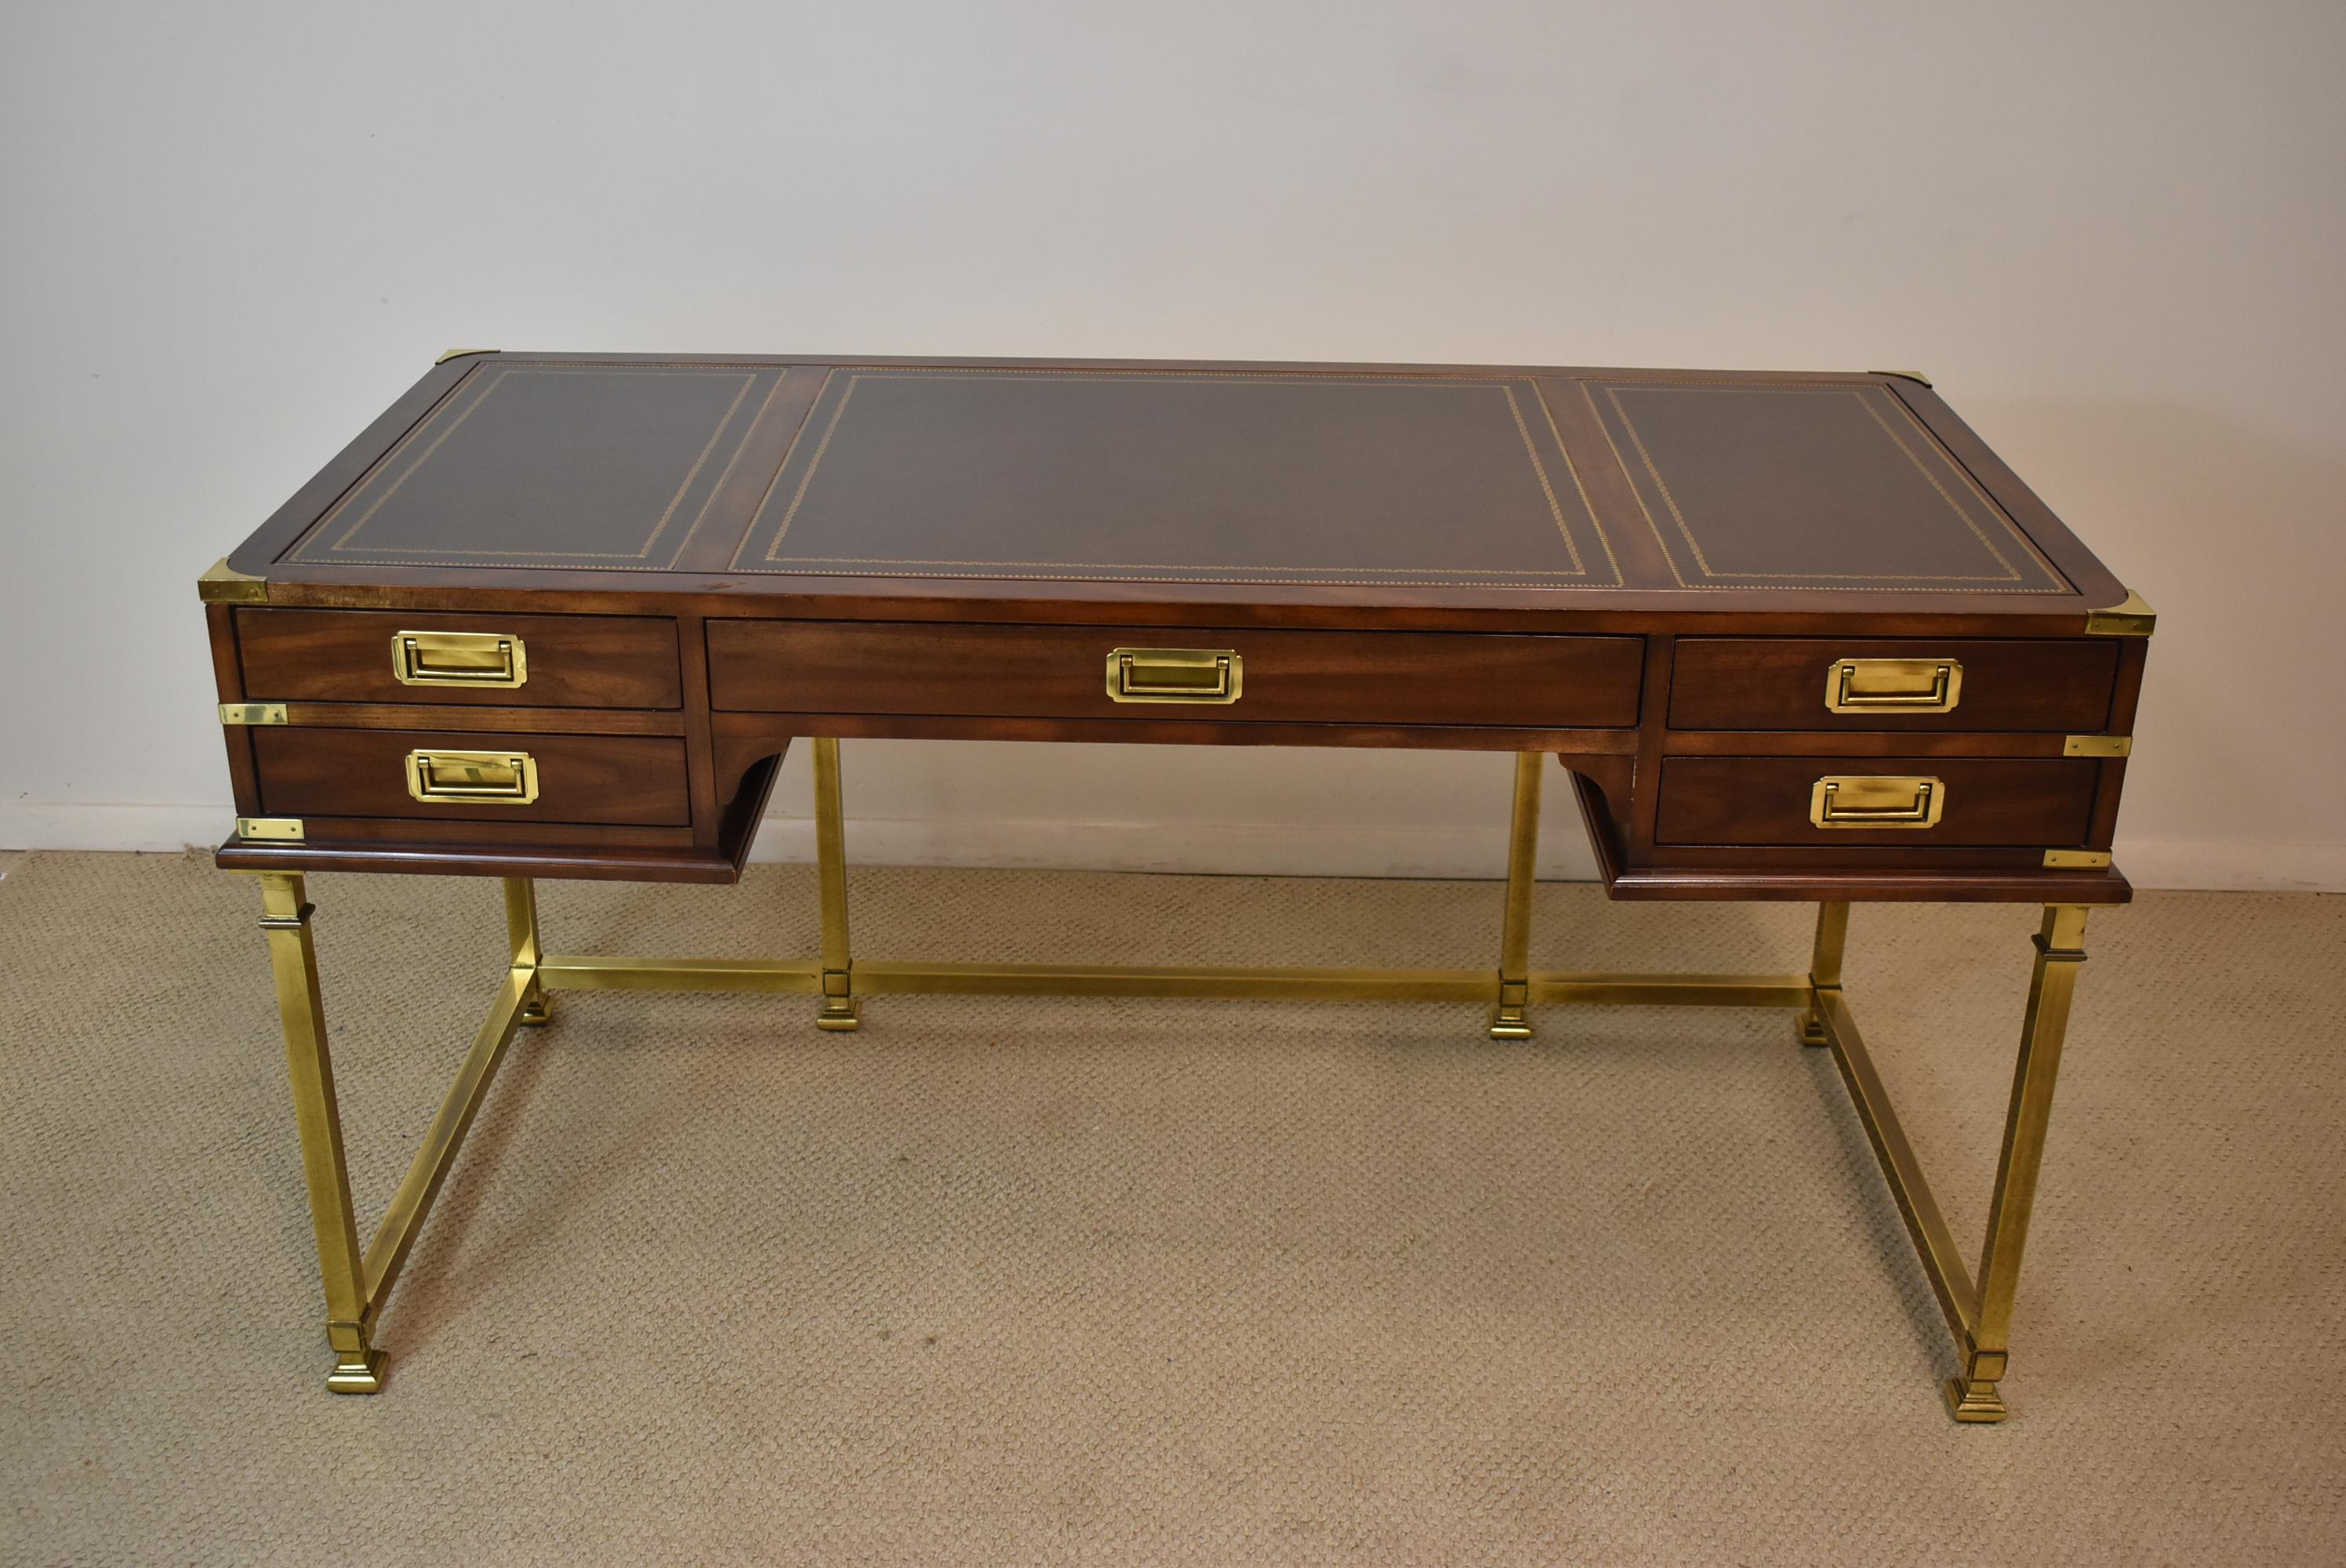 Sligh campaign style desk in brass and cherry with a tooled leather top. Brass legs and corner brackets. Five dove tailed drawers. There is a custom piece that can be purchased in another listing as shown in last photo.